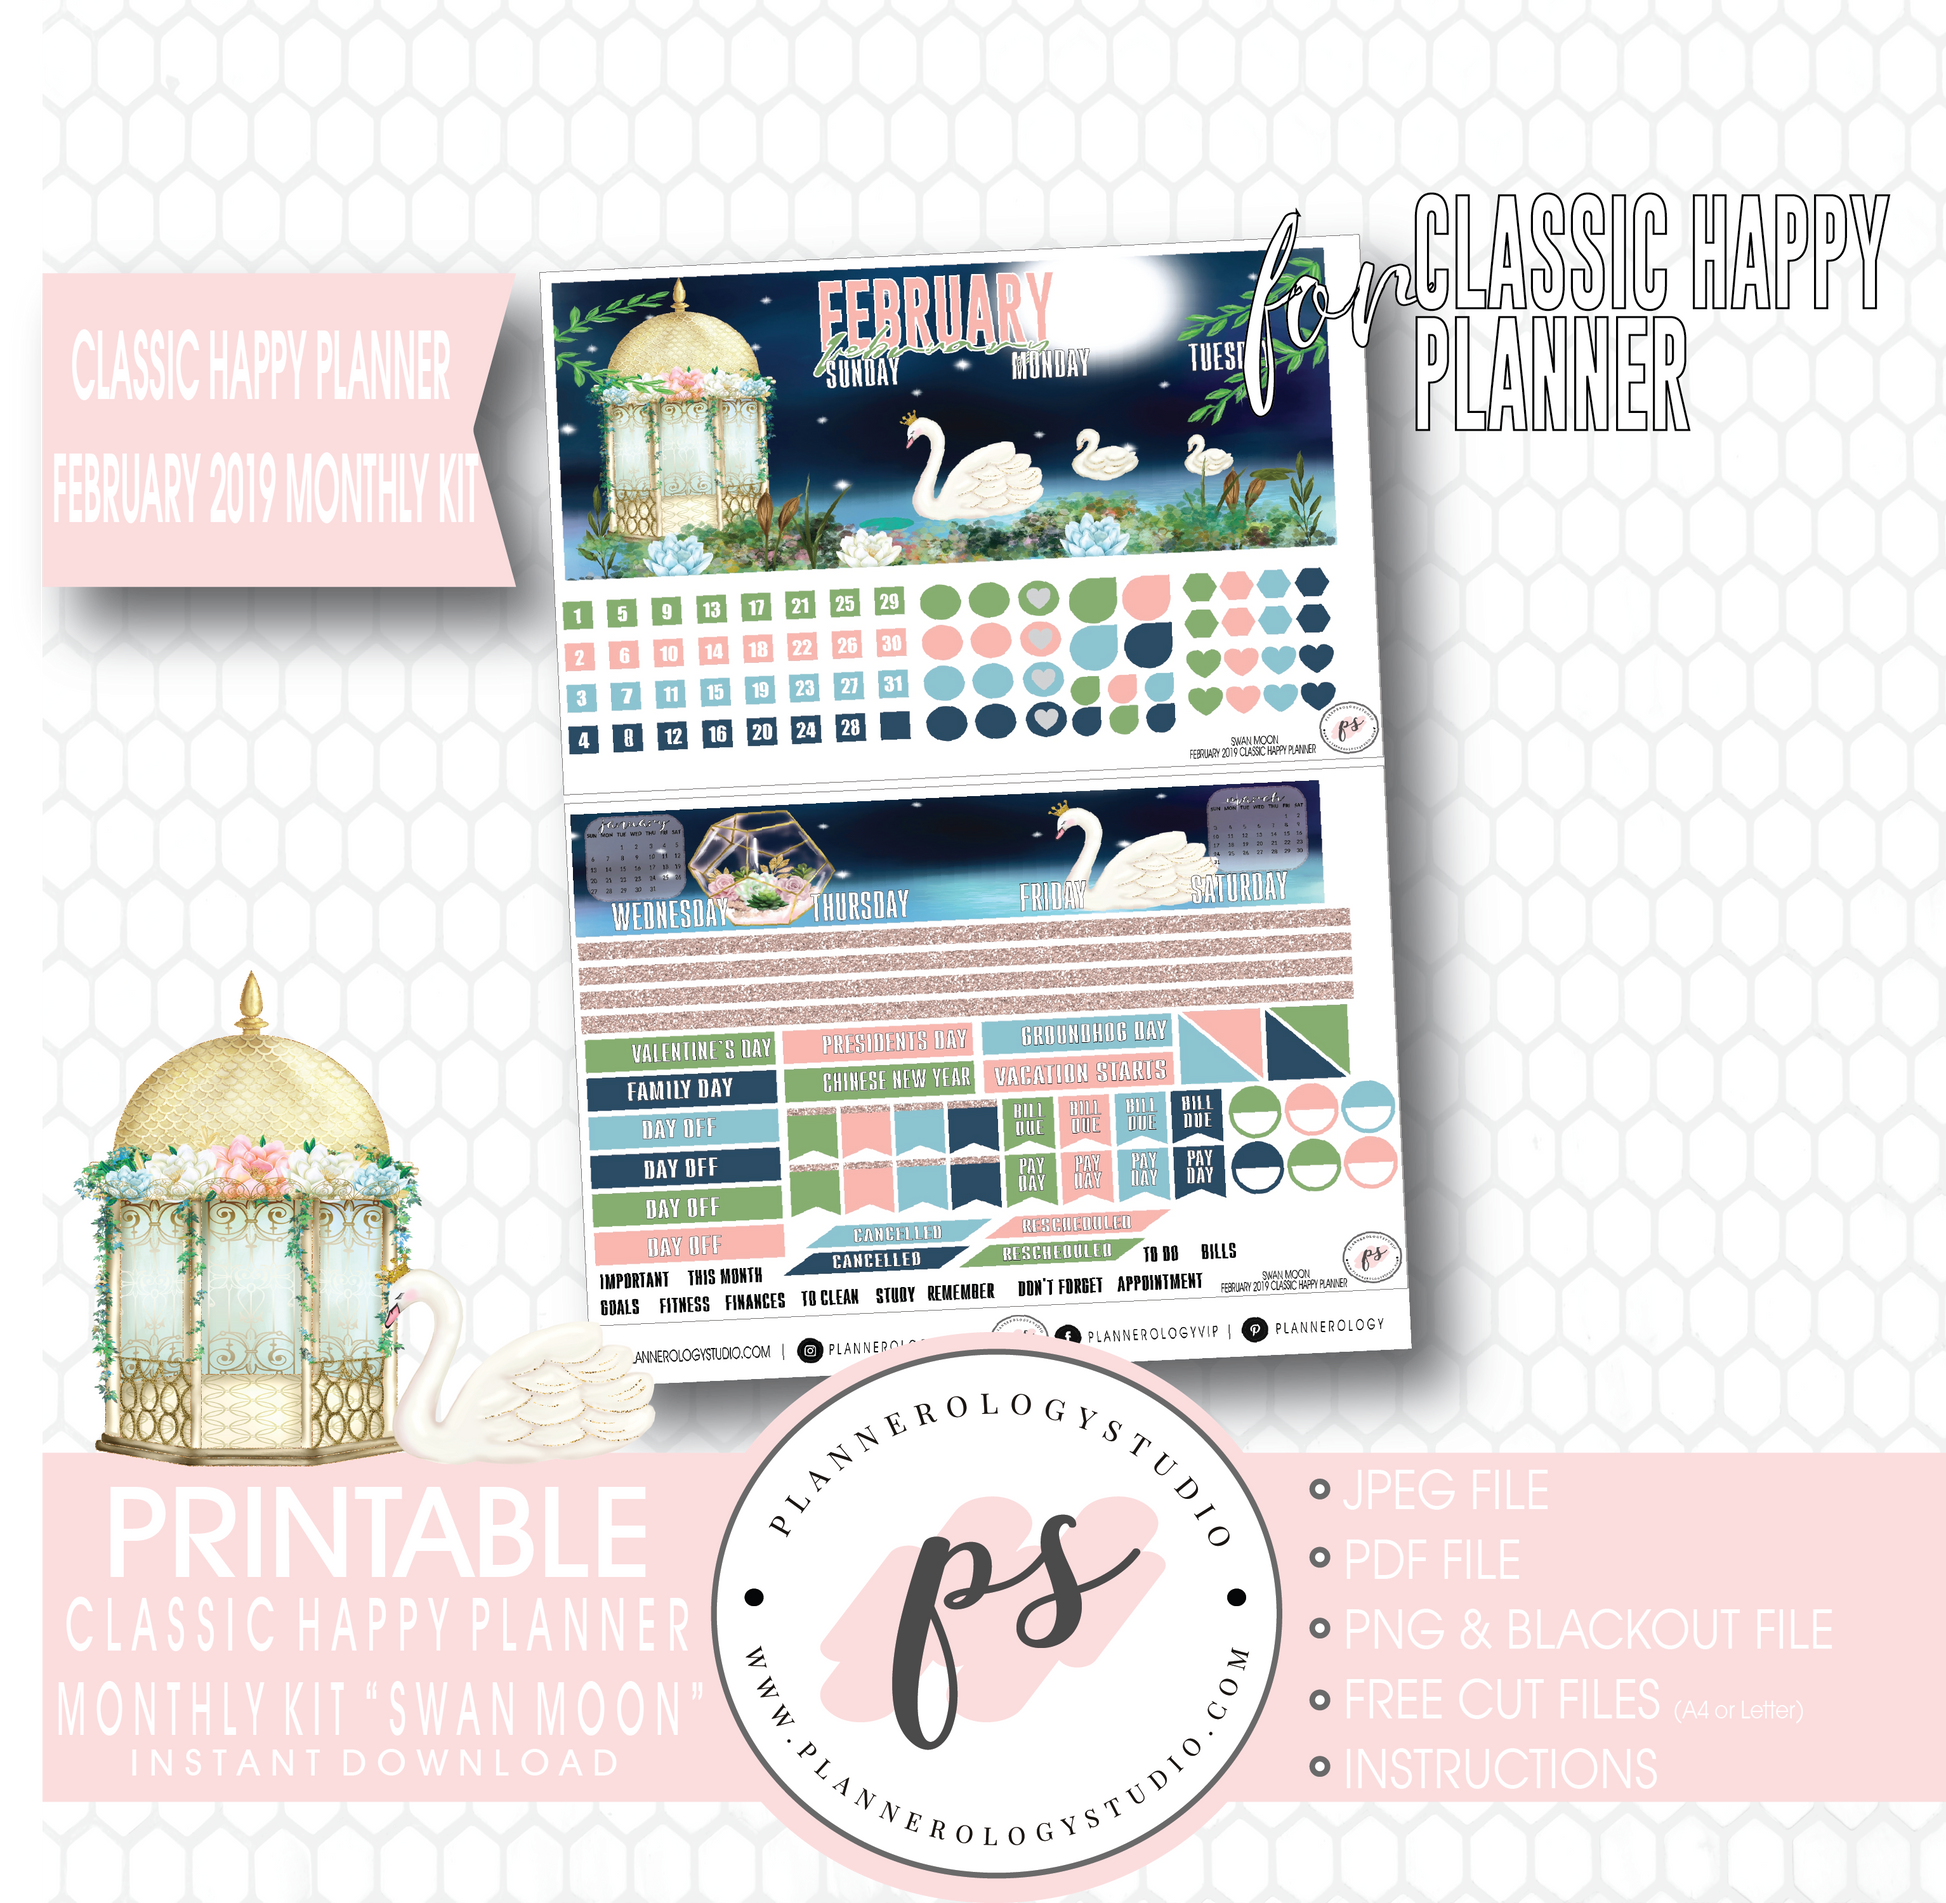 Swan Moon February 2019 Monthly View Kit Digital Printable Planner Stickers (for use with Classic Happy Planner) - Plannerologystudio